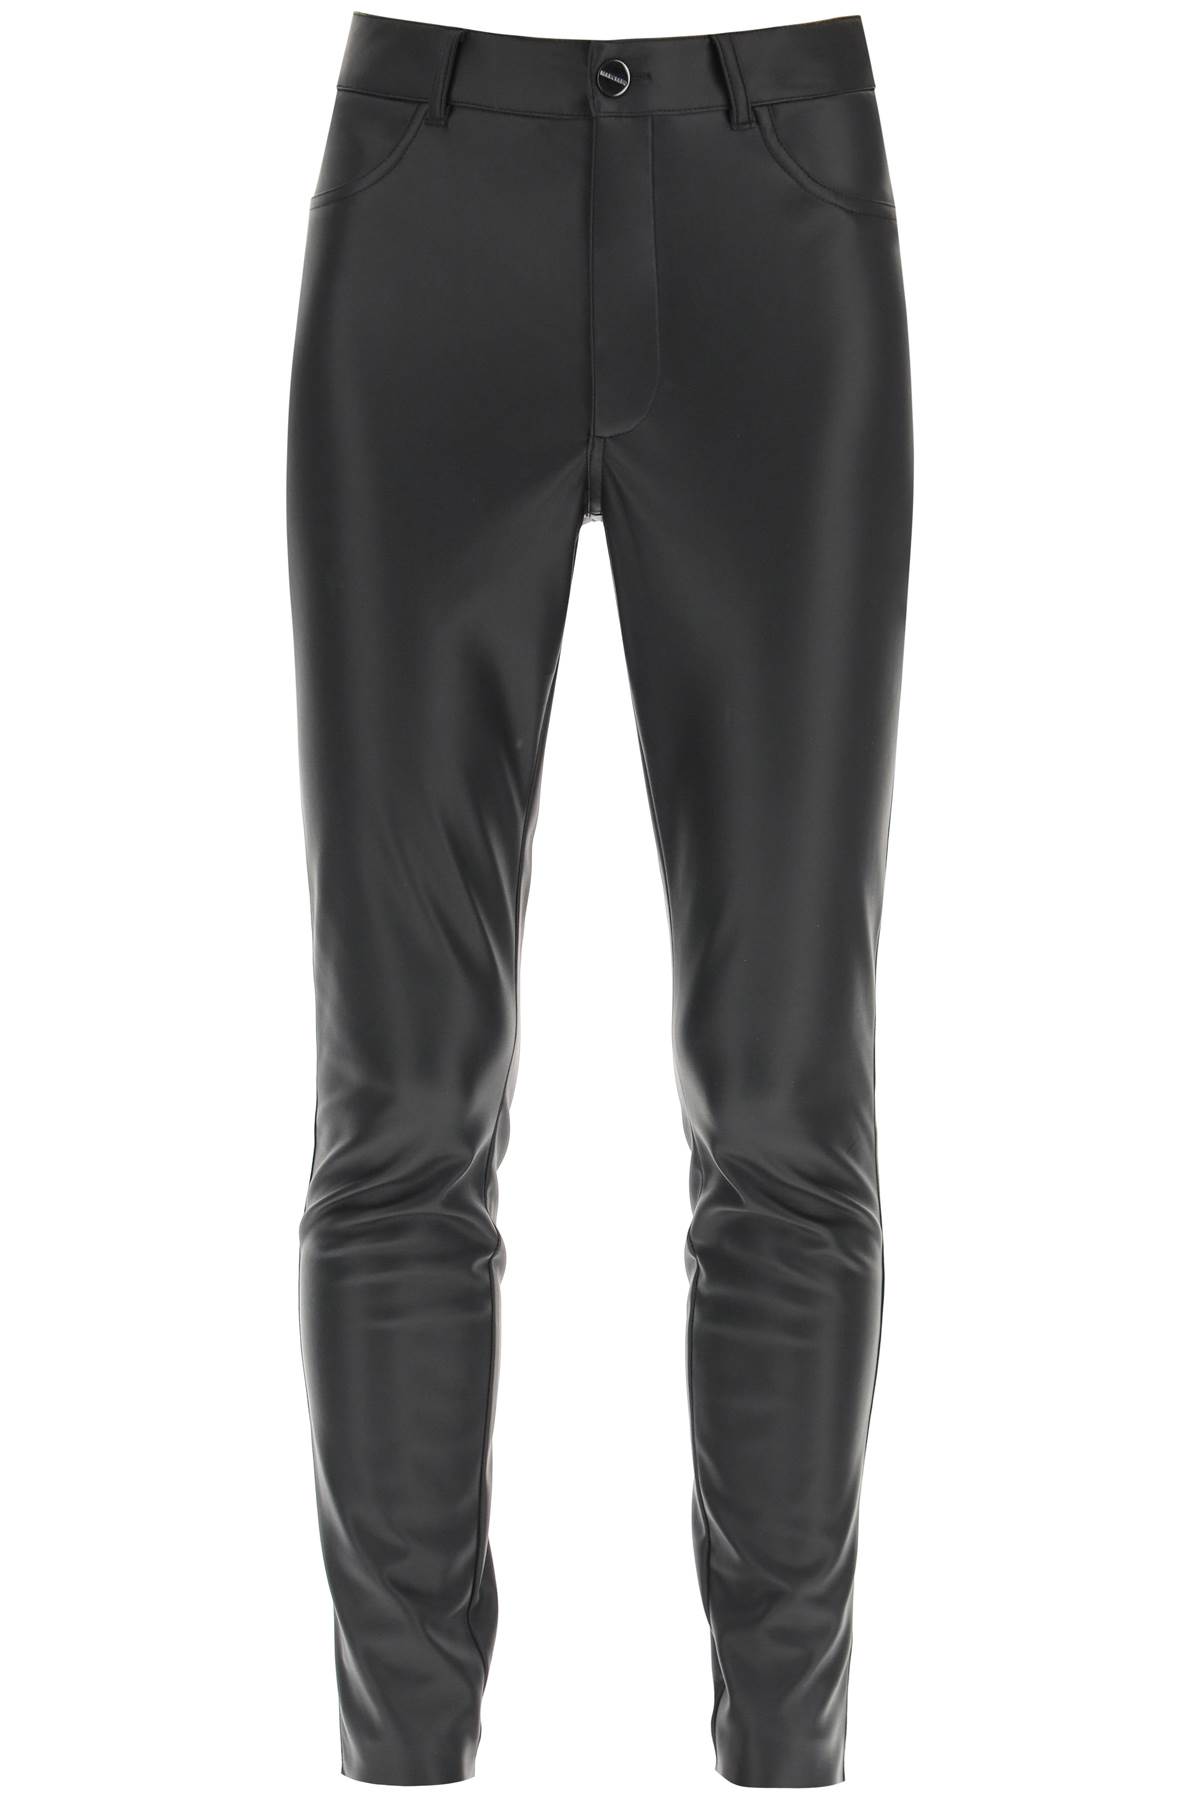 Guess By Marciano Skinny Faux Leather Pants In Jet Black A996 (black)